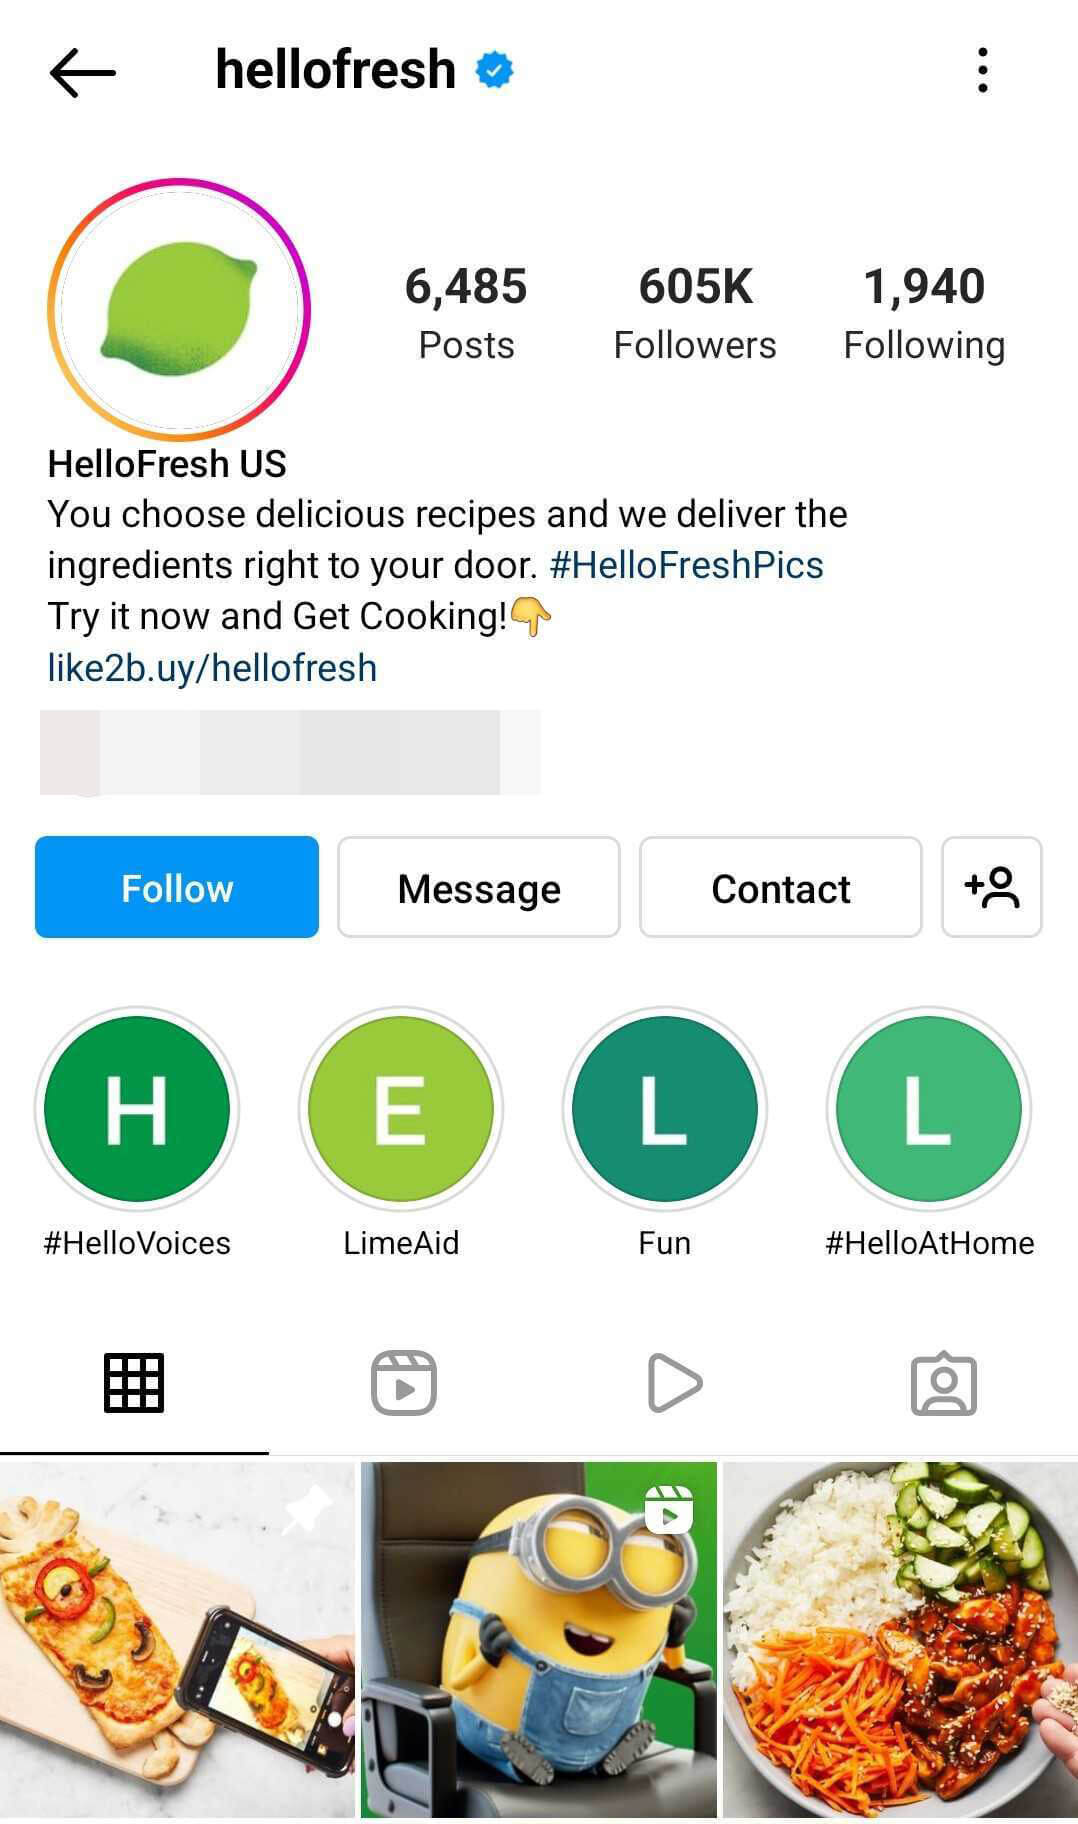 how-to-instagram-grid-pinning-feature-marketing-limited-time-offer-hellofresh-step-1